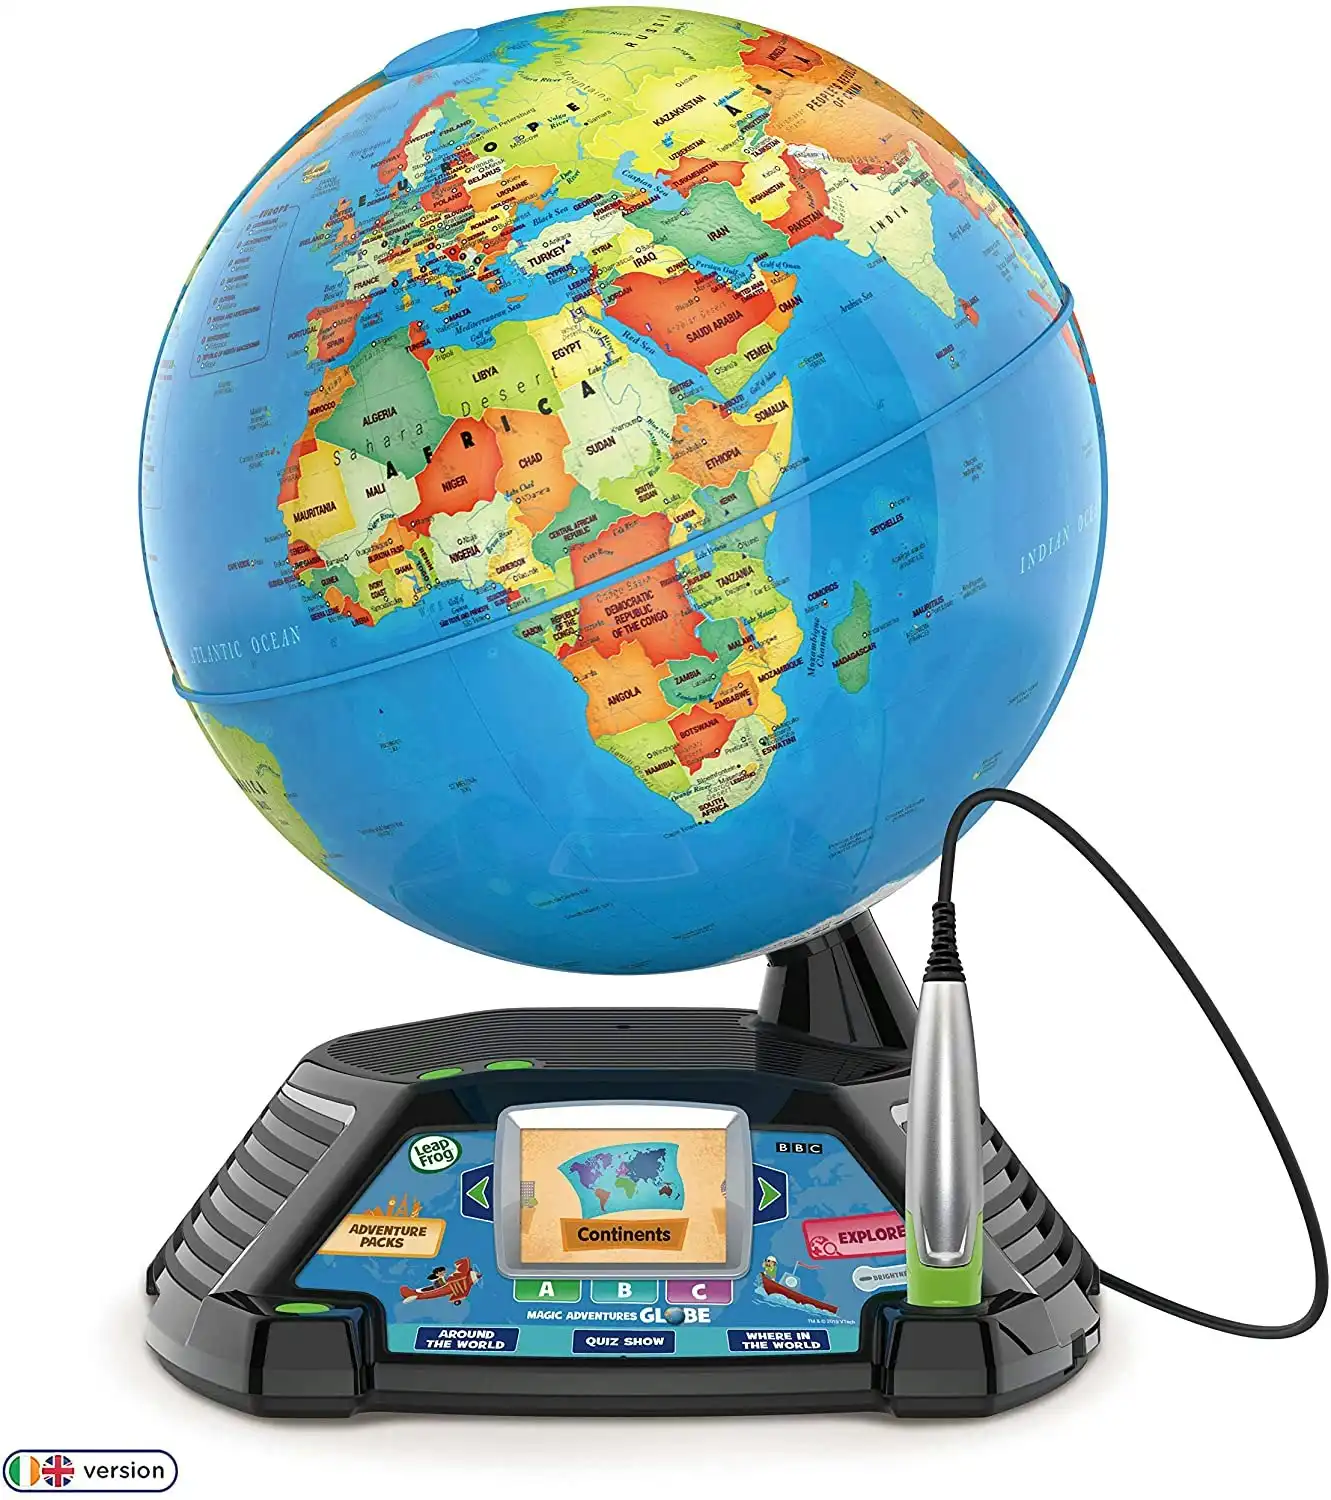 LeapFrog - Magic Adventures Globe - Interactive Educational Children's Globe with LCD Screen and BBC Videos